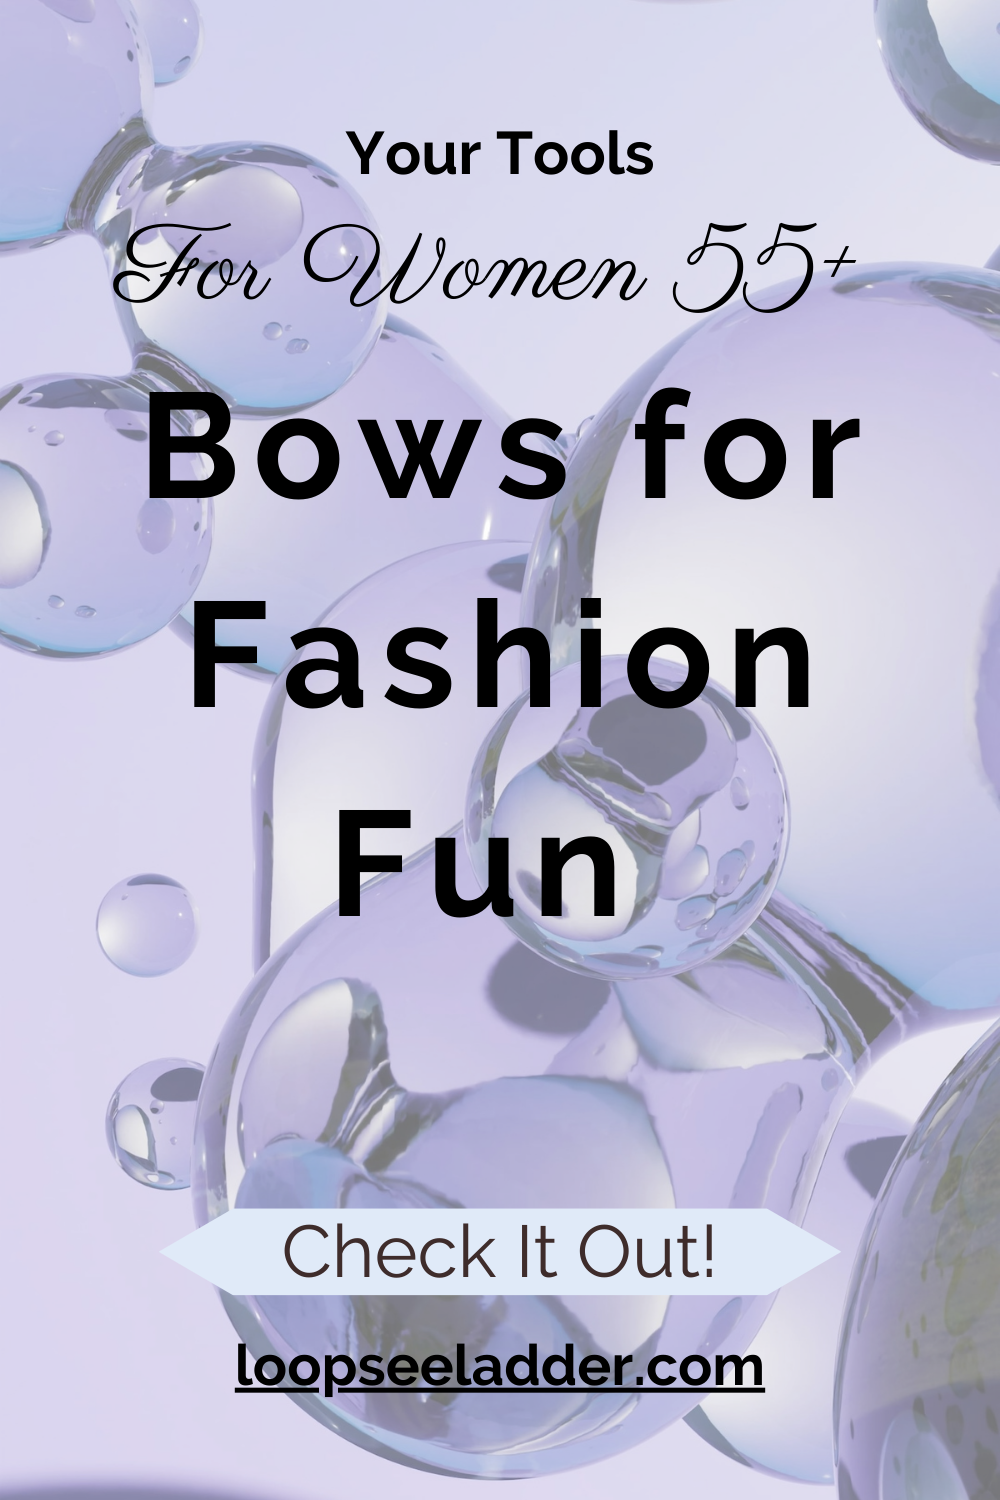 Bow Accessories Unleashed: How Women 55+ Are Redefining Fashion Fun